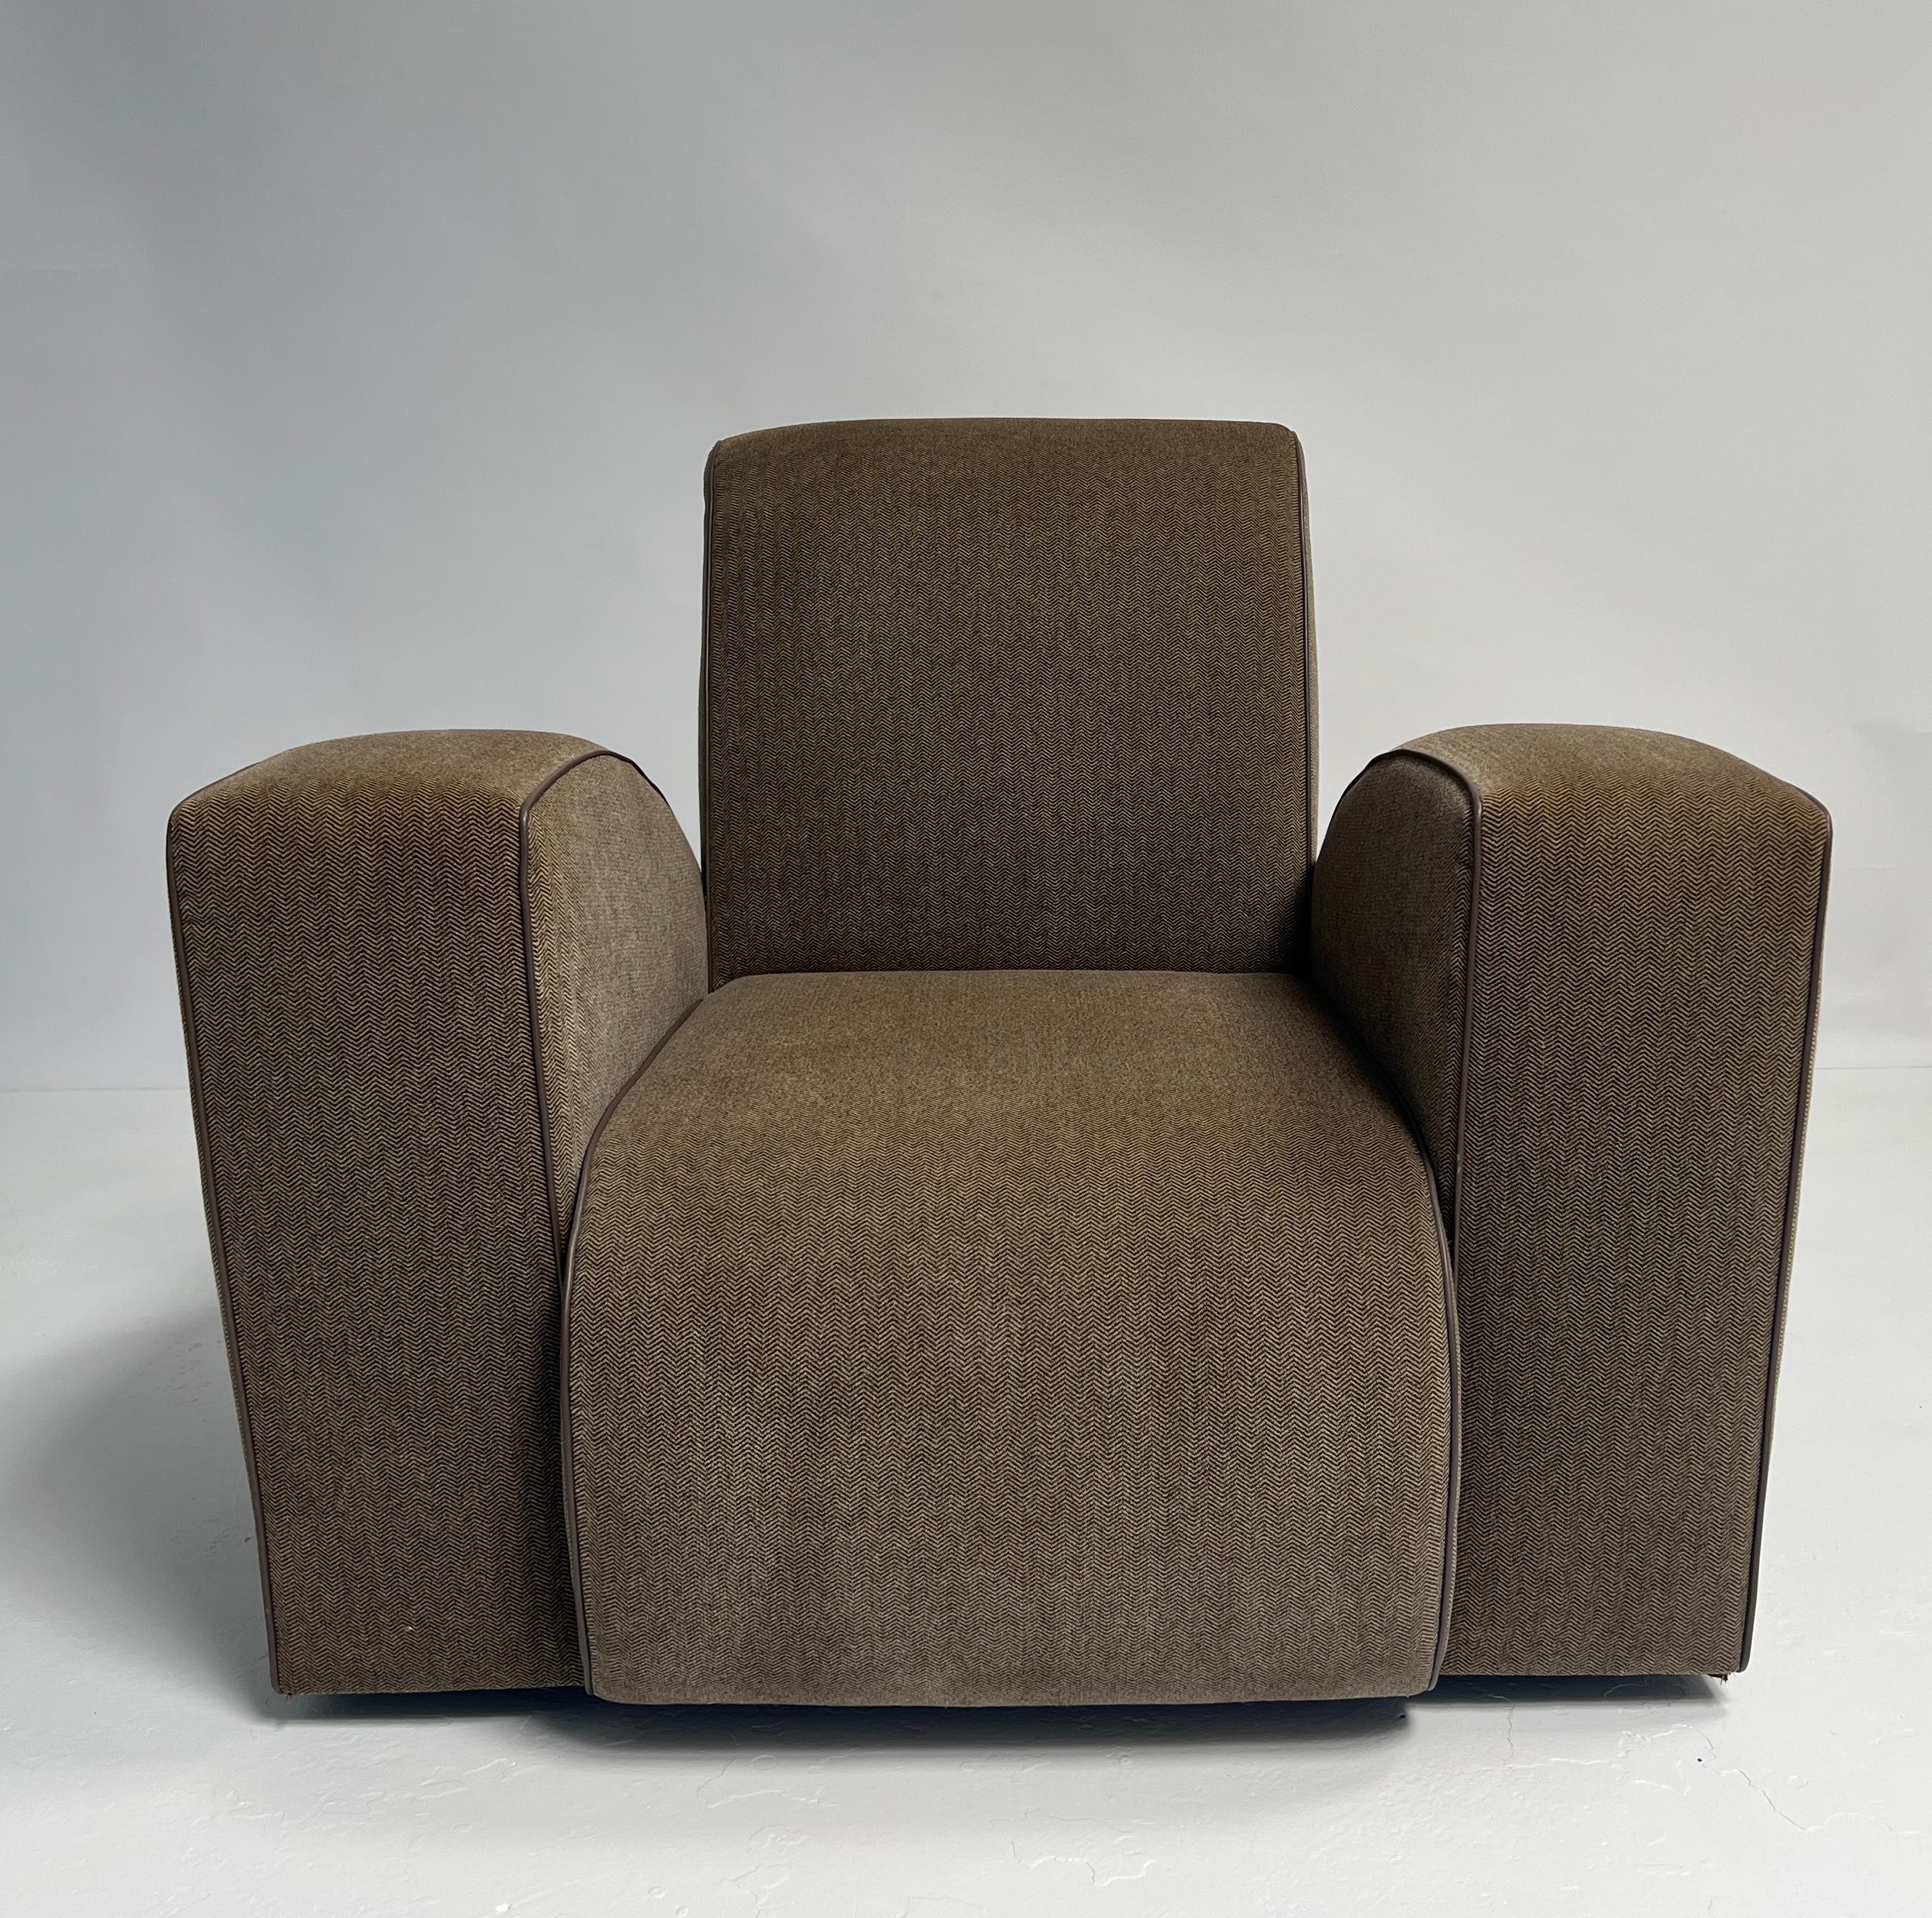 Upholstery Valmont Arm Chair by Bourgeois Boheme Atelier For Sale